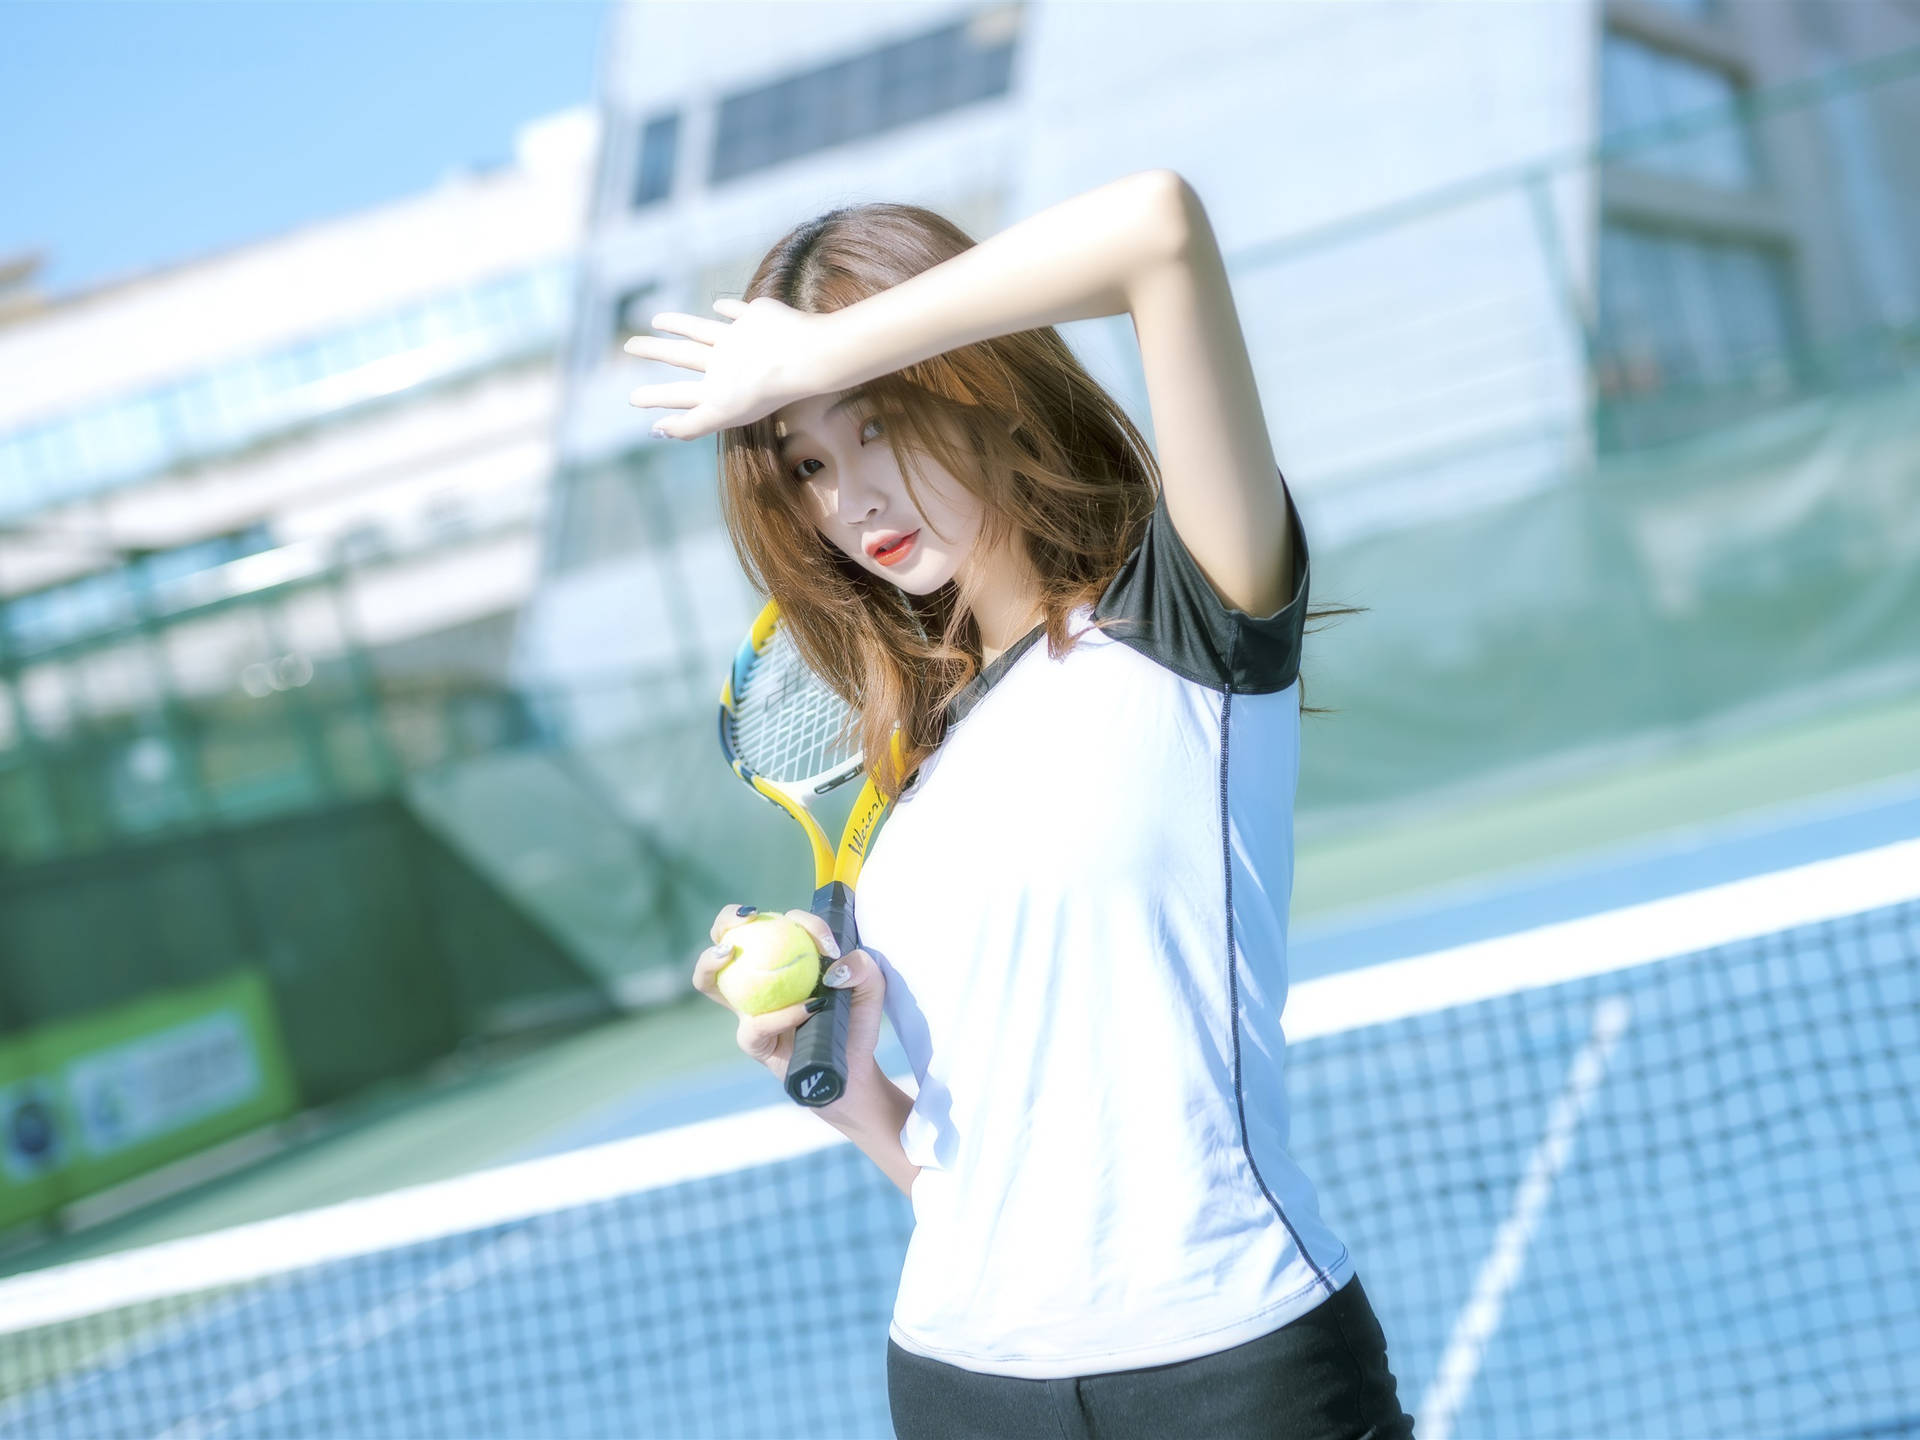 Tennis-playing Chinese Woman Background